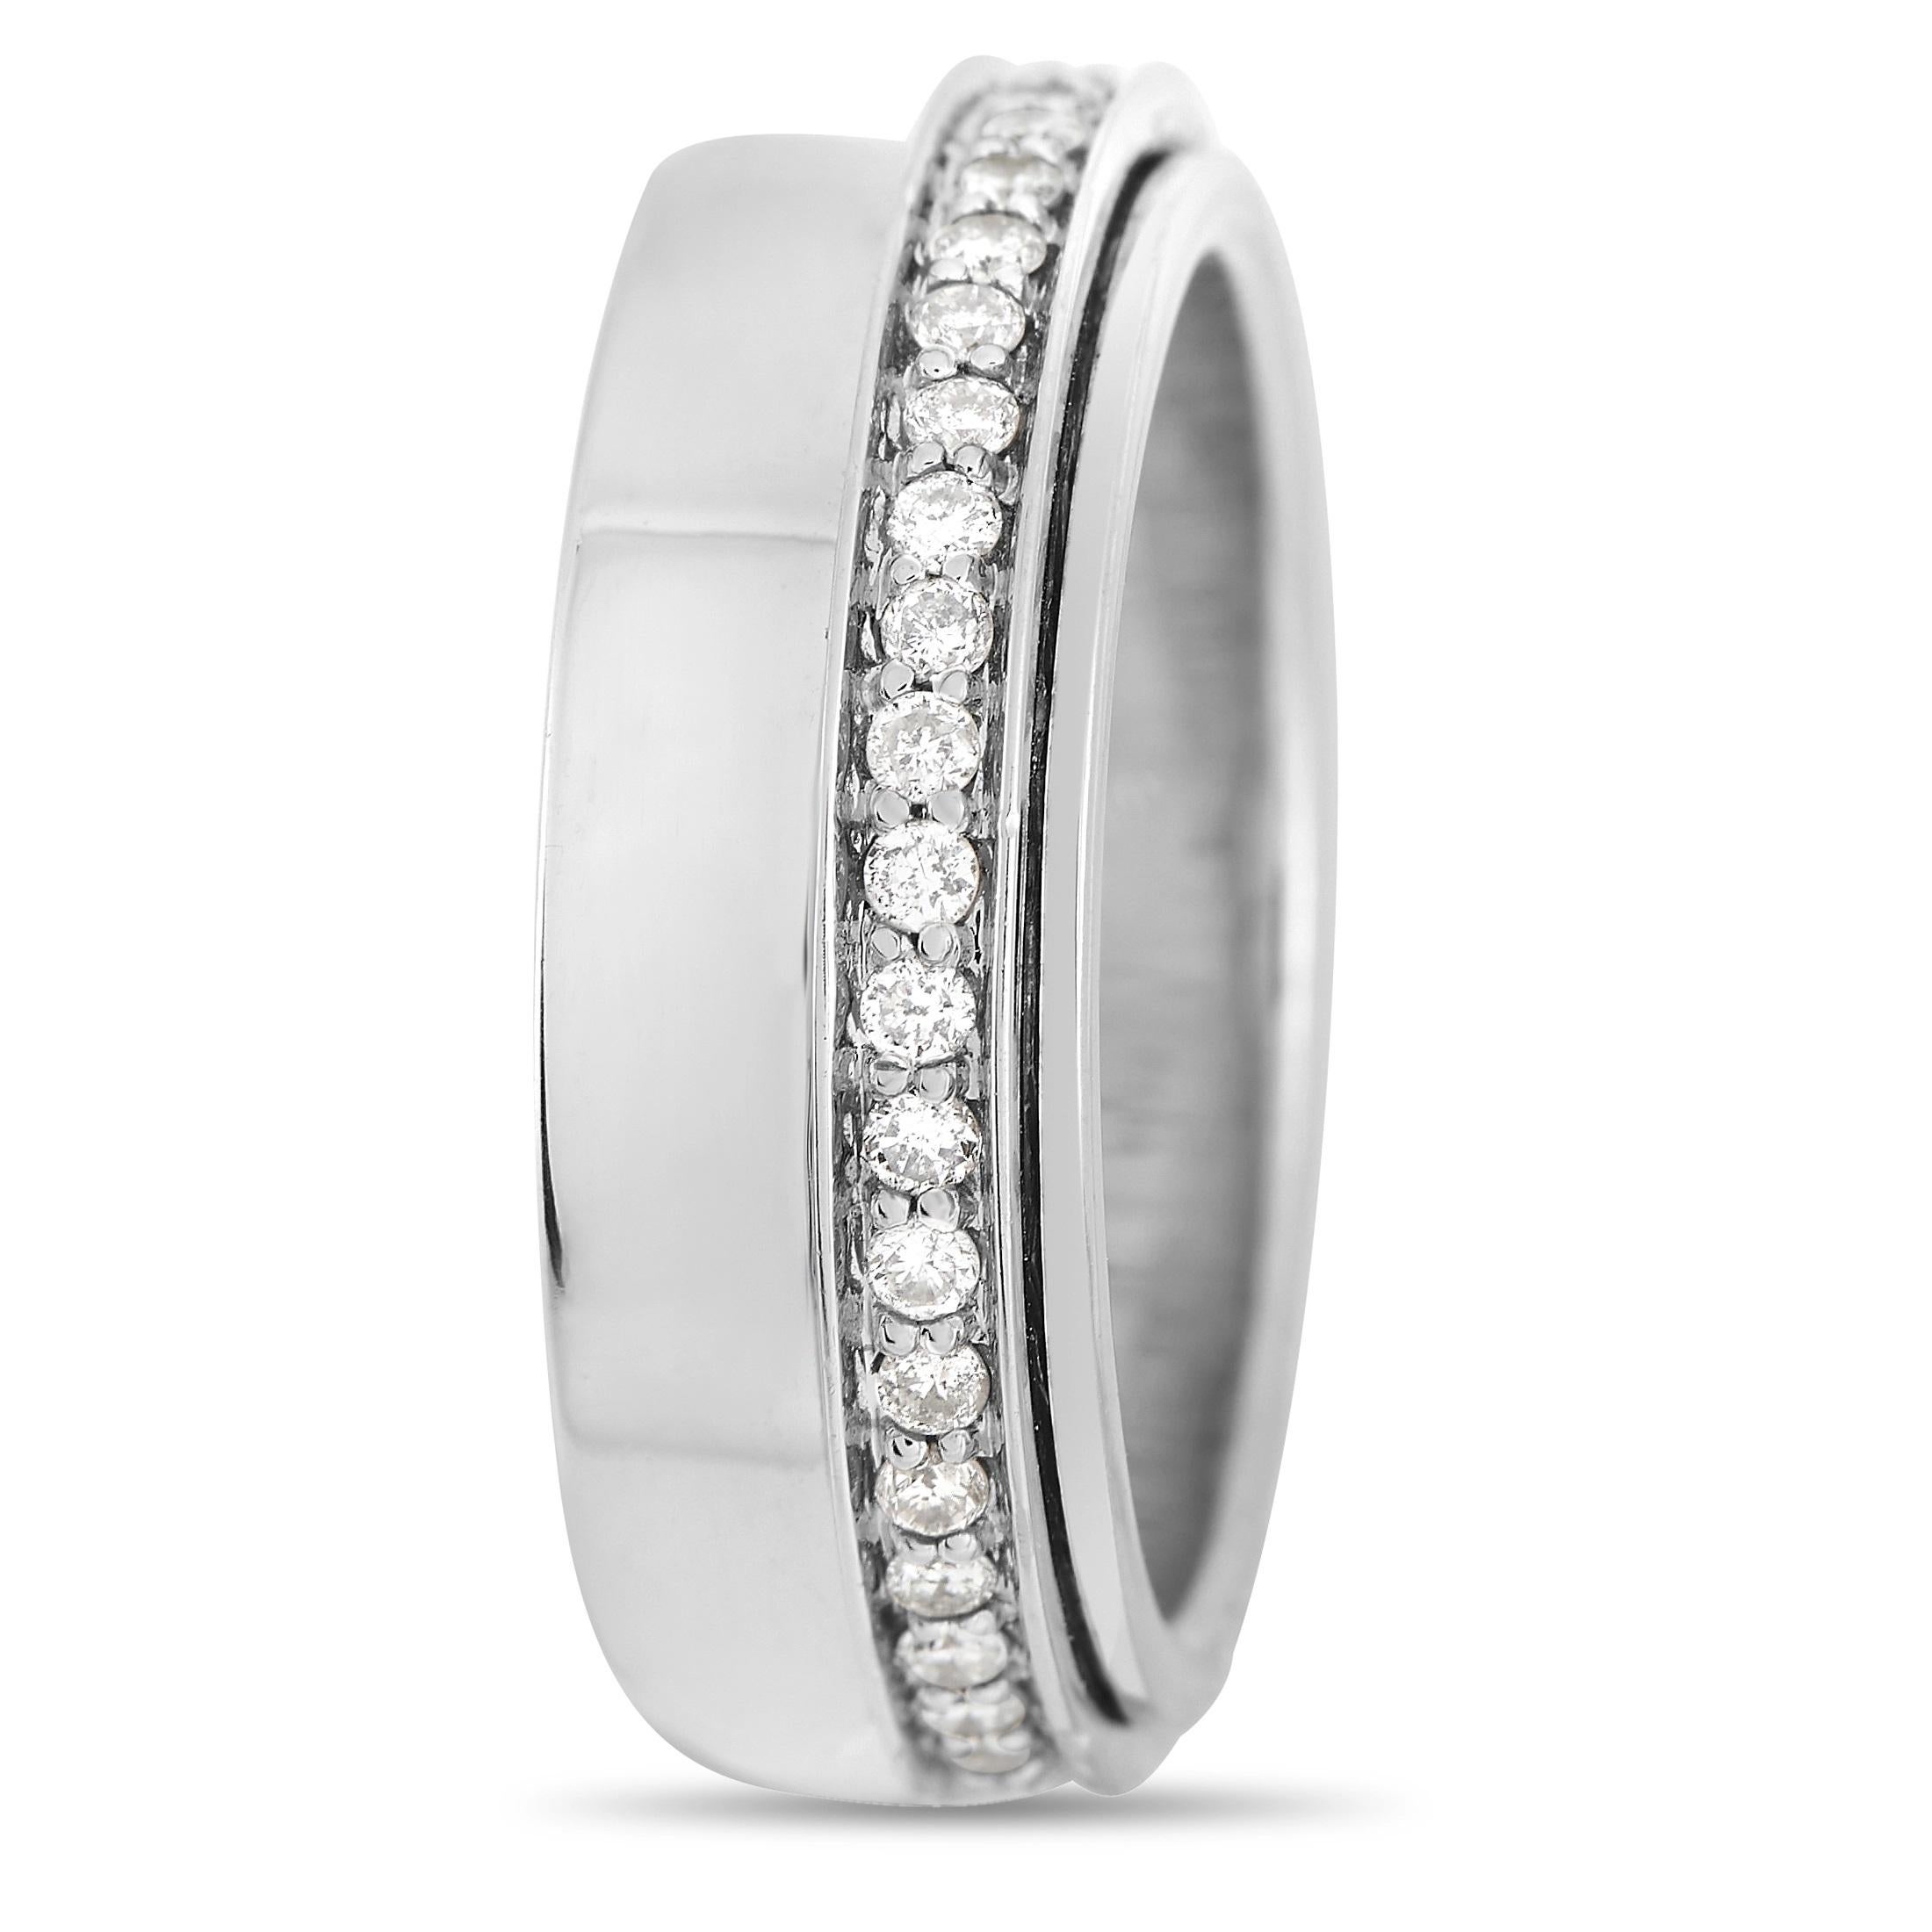 A striking 18K White Gold setting sets this ring apart in the best way possible. Adorned with a band of diamonds totaling 0.75 carats, it measures 6mm wide and possess a chic, sophisticated sense of style. 
 
 This jewelry piece is offered in